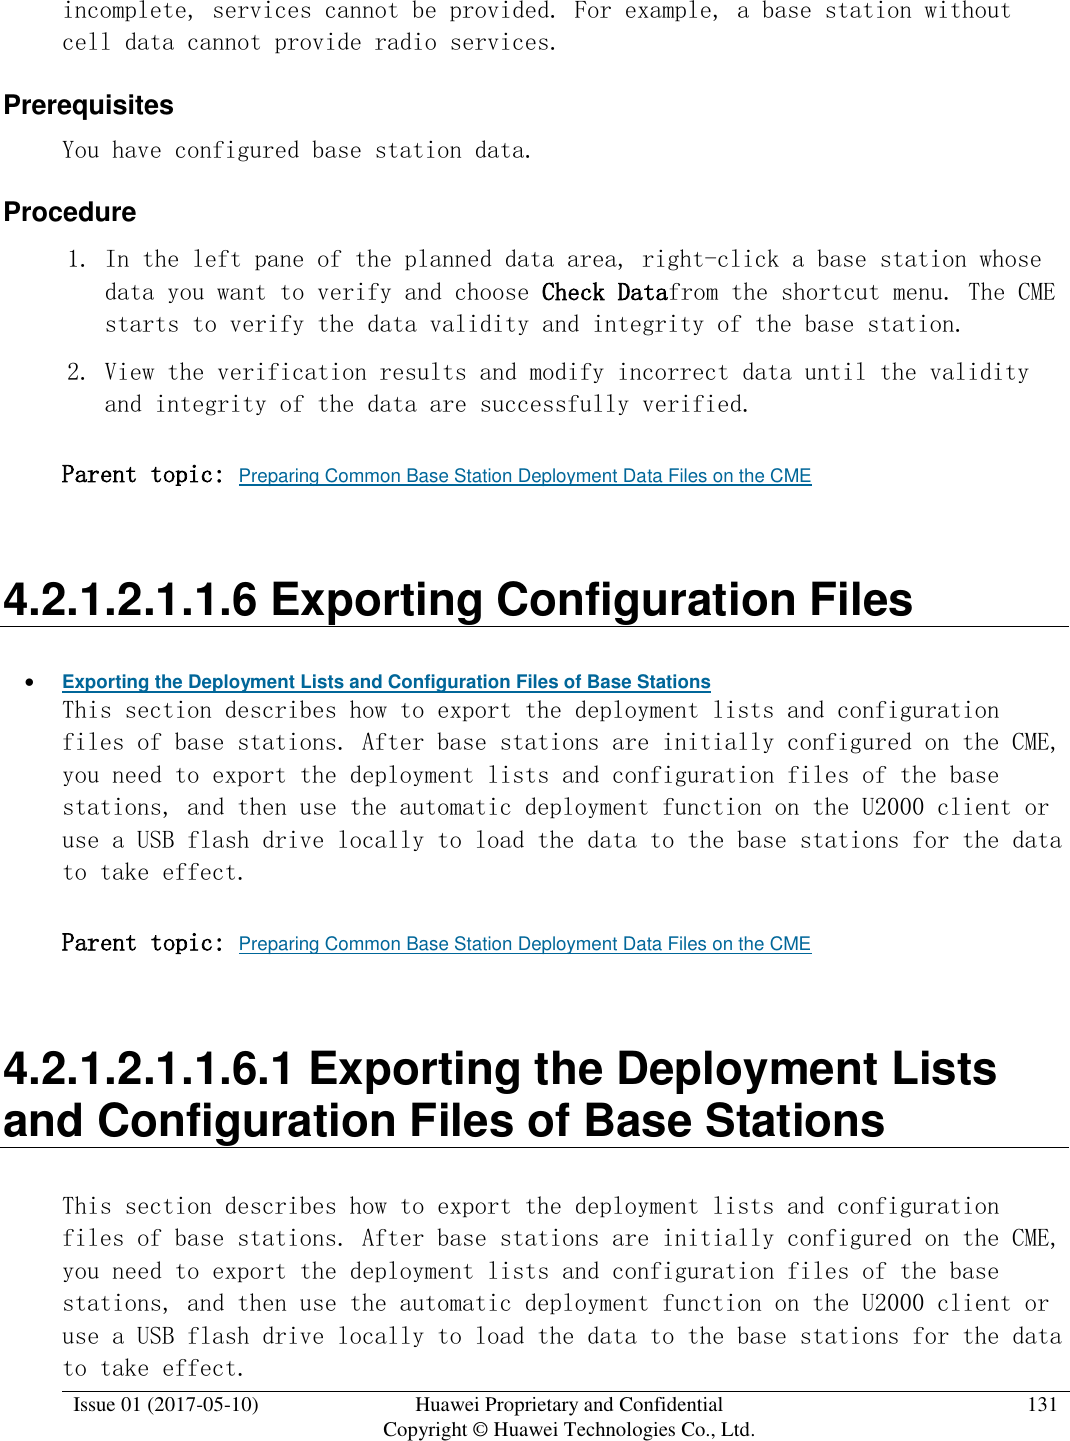  Issue 01 (2017-05-10) Huawei Proprietary and Confidential      Copyright © Huawei Technologies Co., Ltd. 131  incomplete, services cannot be provided. For example, a base station without cell data cannot provide radio services.  Prerequisites You have configured base station data.  Procedure 1. In the left pane of the planned data area, right-click a base station whose data you want to verify and choose Check Datafrom the shortcut menu. The CME starts to verify the data validity and integrity of the base station.  2. View the verification results and modify incorrect data until the validity and integrity of the data are successfully verified.  Parent topic: Preparing Common Base Station Deployment Data Files on the CME 4.2.1.2.1.1.6 Exporting Configuration Files  Exporting the Deployment Lists and Configuration Files of Base Stations This section describes how to export the deployment lists and configuration files of base stations. After base stations are initially configured on the CME, you need to export the deployment lists and configuration files of the base stations, and then use the automatic deployment function on the U2000 client or use a USB flash drive locally to load the data to the base stations for the data to take effect.  Parent topic: Preparing Common Base Station Deployment Data Files on the CME 4.2.1.2.1.1.6.1 Exporting the Deployment Lists and Configuration Files of Base Stations This section describes how to export the deployment lists and configuration files of base stations. After base stations are initially configured on the CME, you need to export the deployment lists and configuration files of the base stations, and then use the automatic deployment function on the U2000 client or use a USB flash drive locally to load the data to the base stations for the data to take effect.  